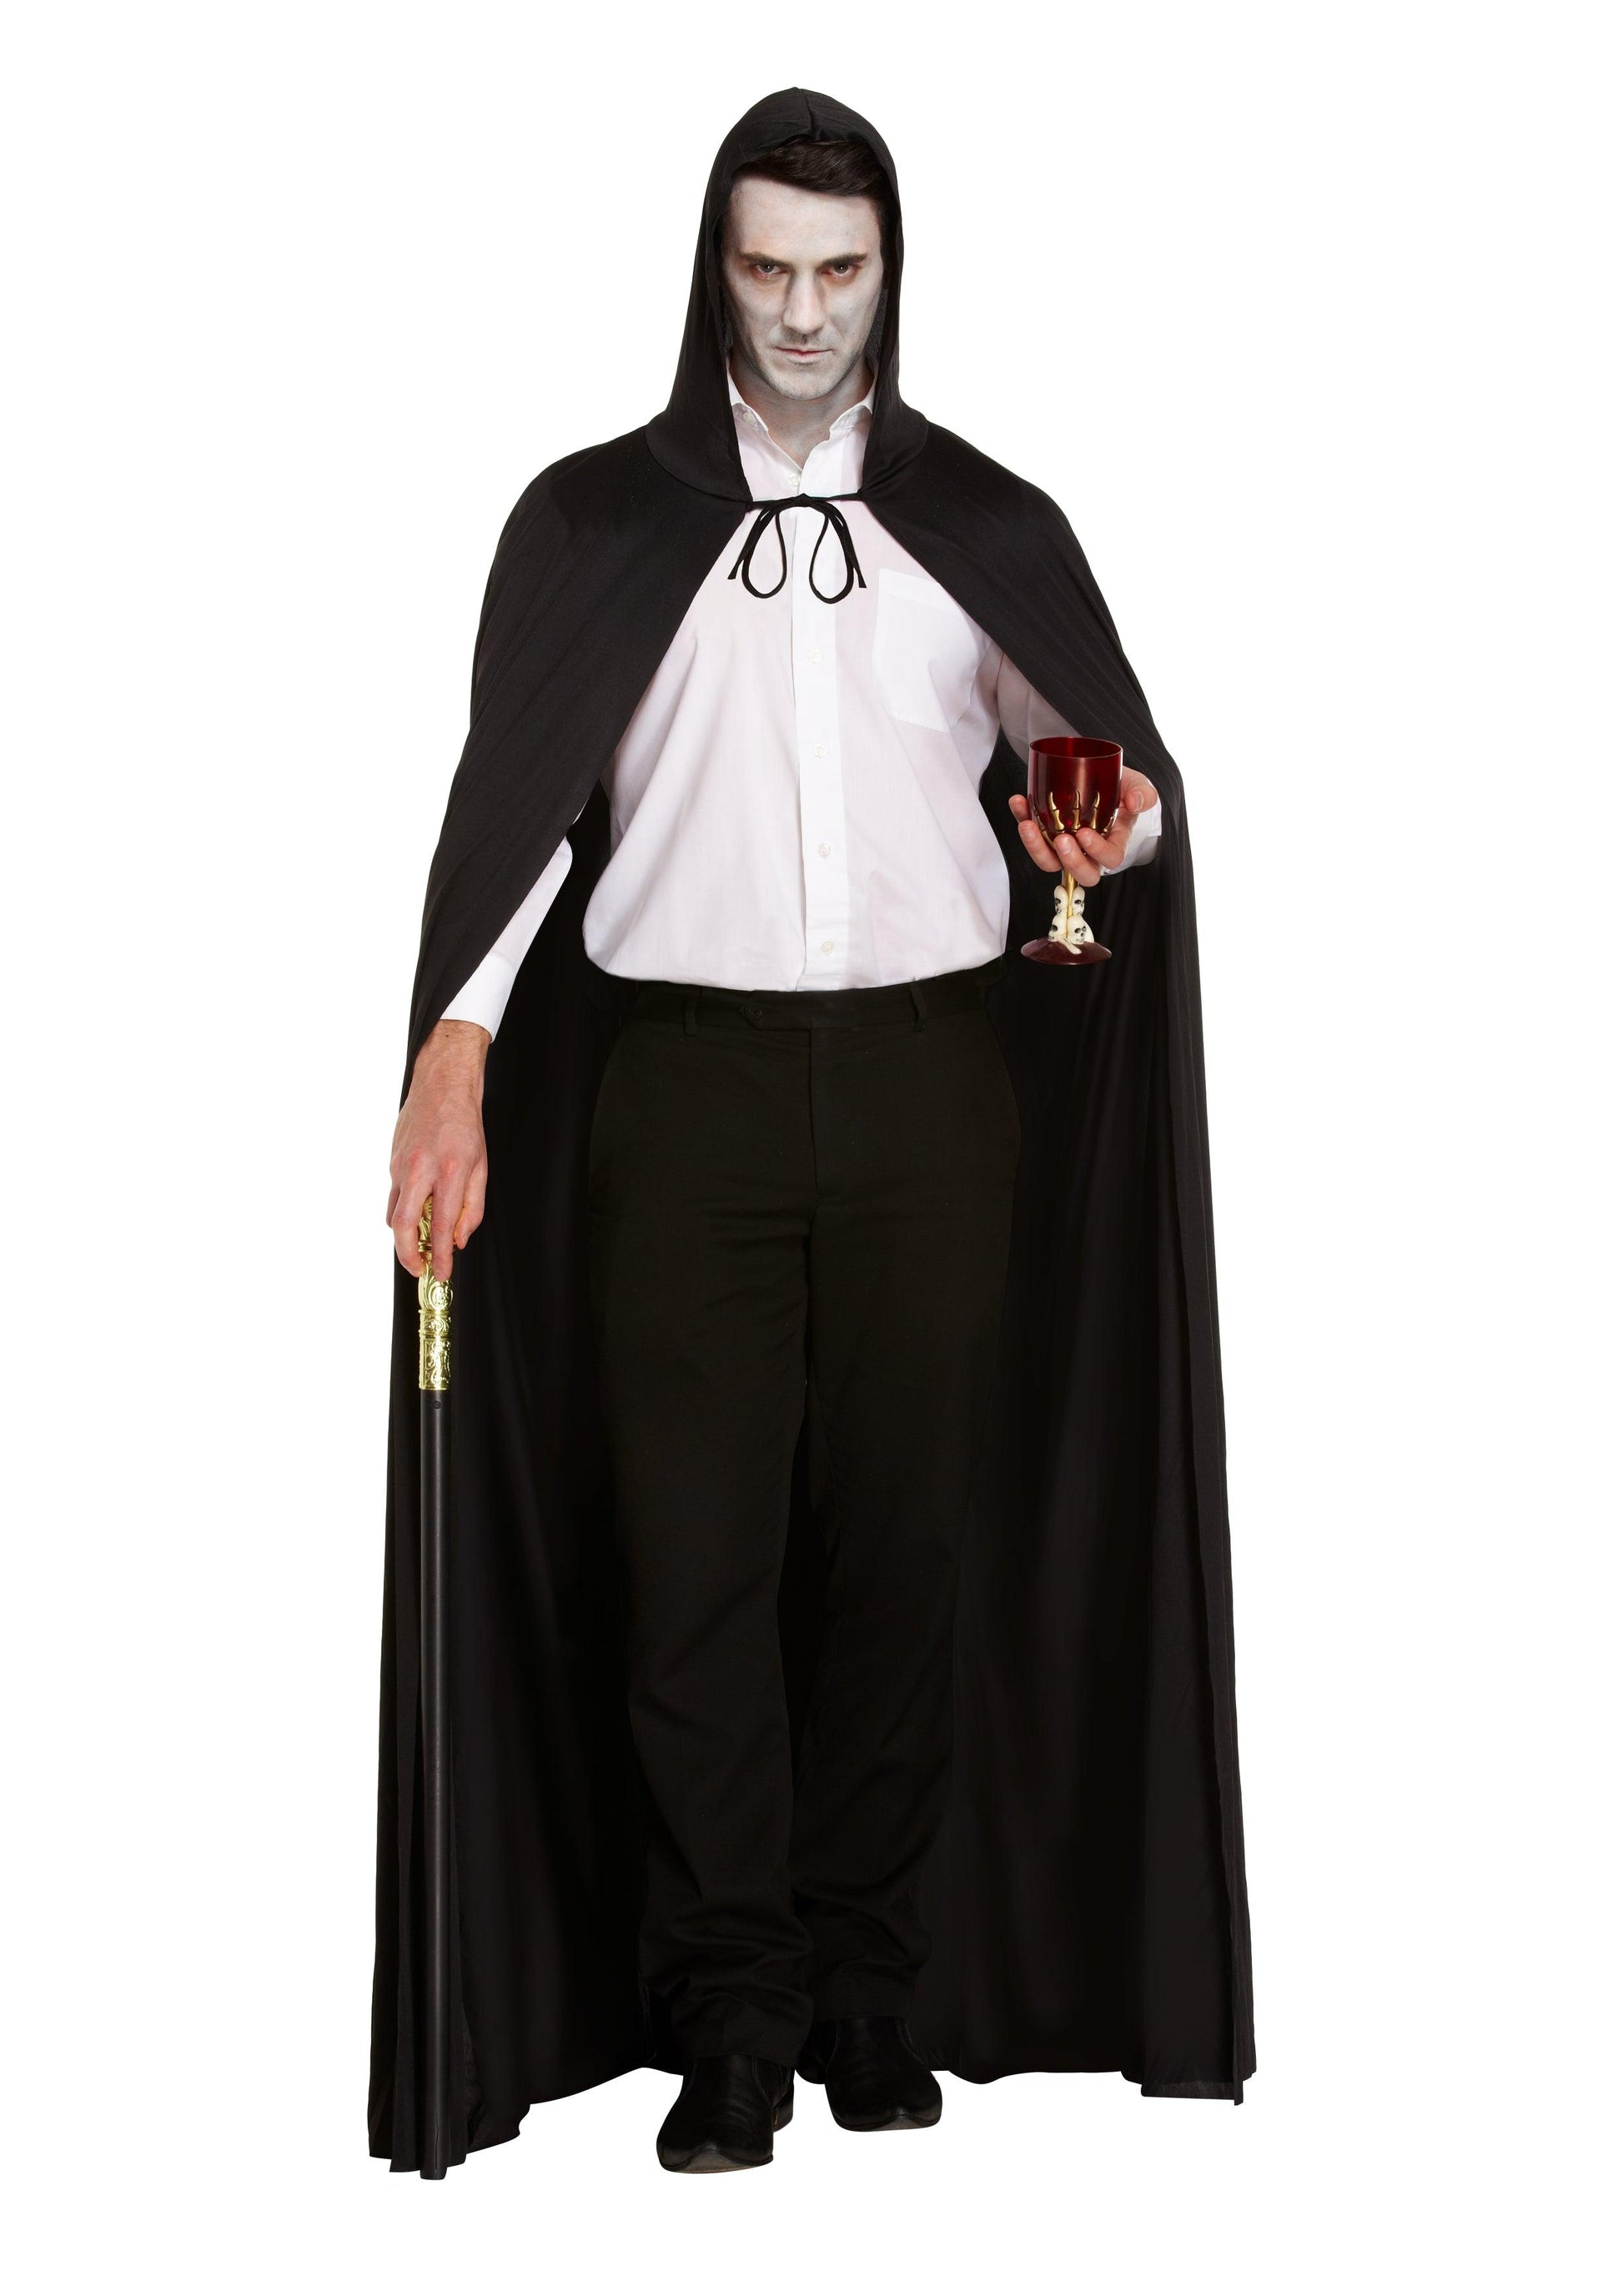 Long Black Cape with Hood, Gold Pimp Cane, and Fake Blood Tube Halloween Gothic Grim Reaper Fancy Dress Costume Set - Labreeze